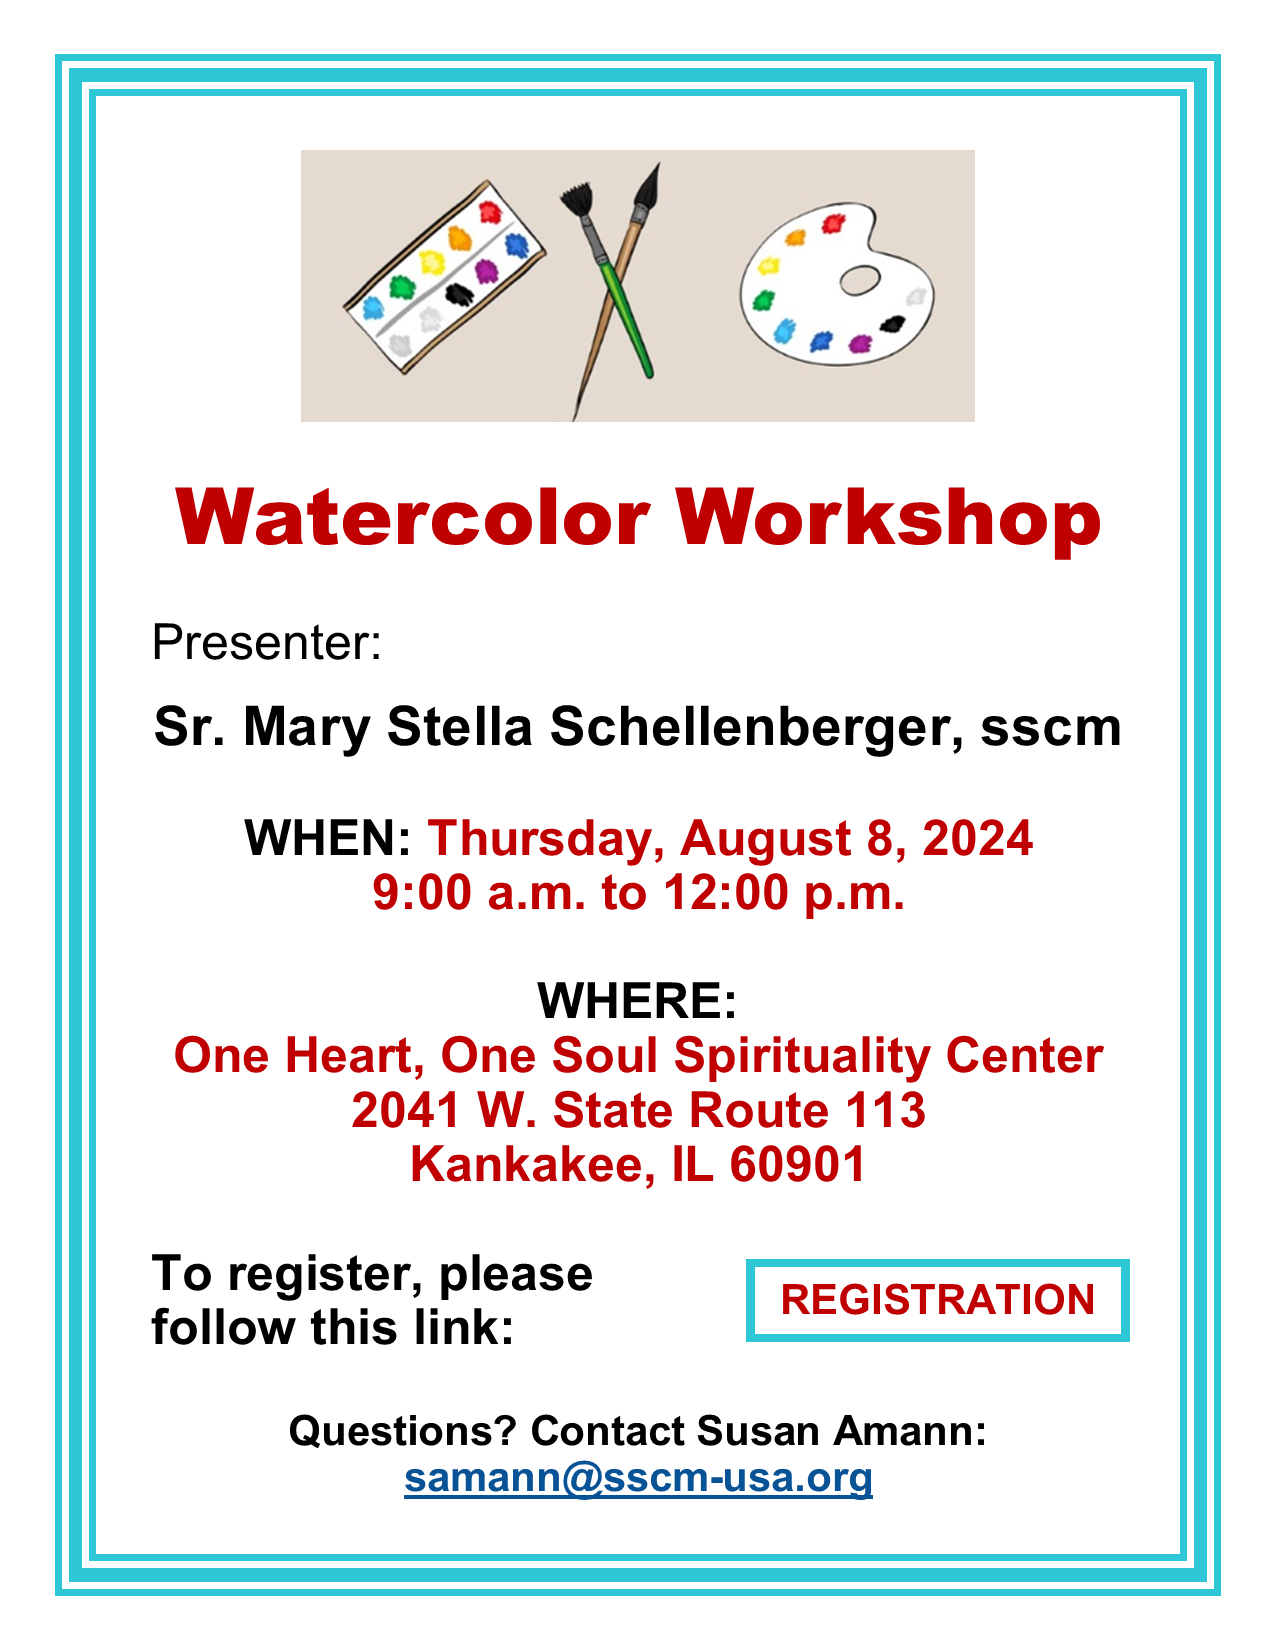 Watercolor Workshop: Click here to register